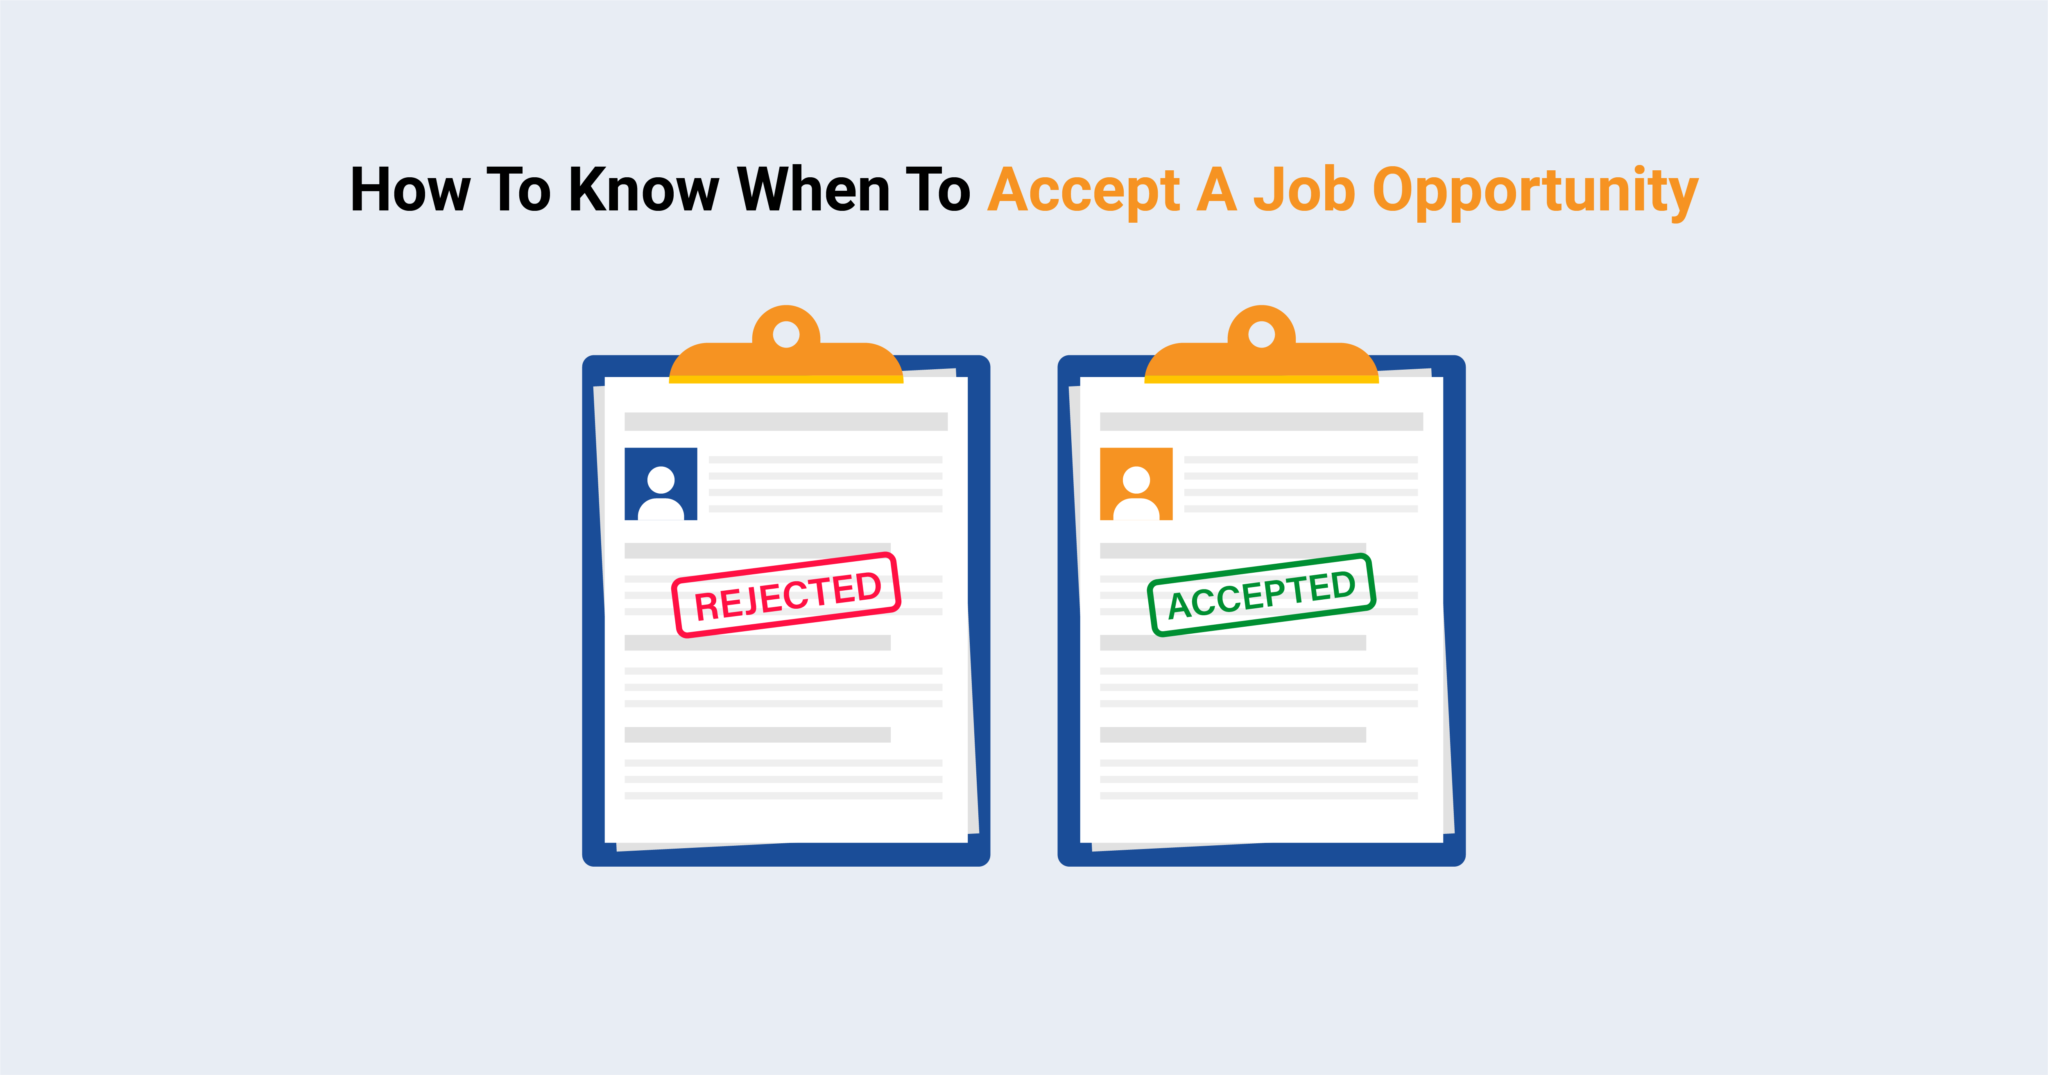 How to know when to accept a job opportunity